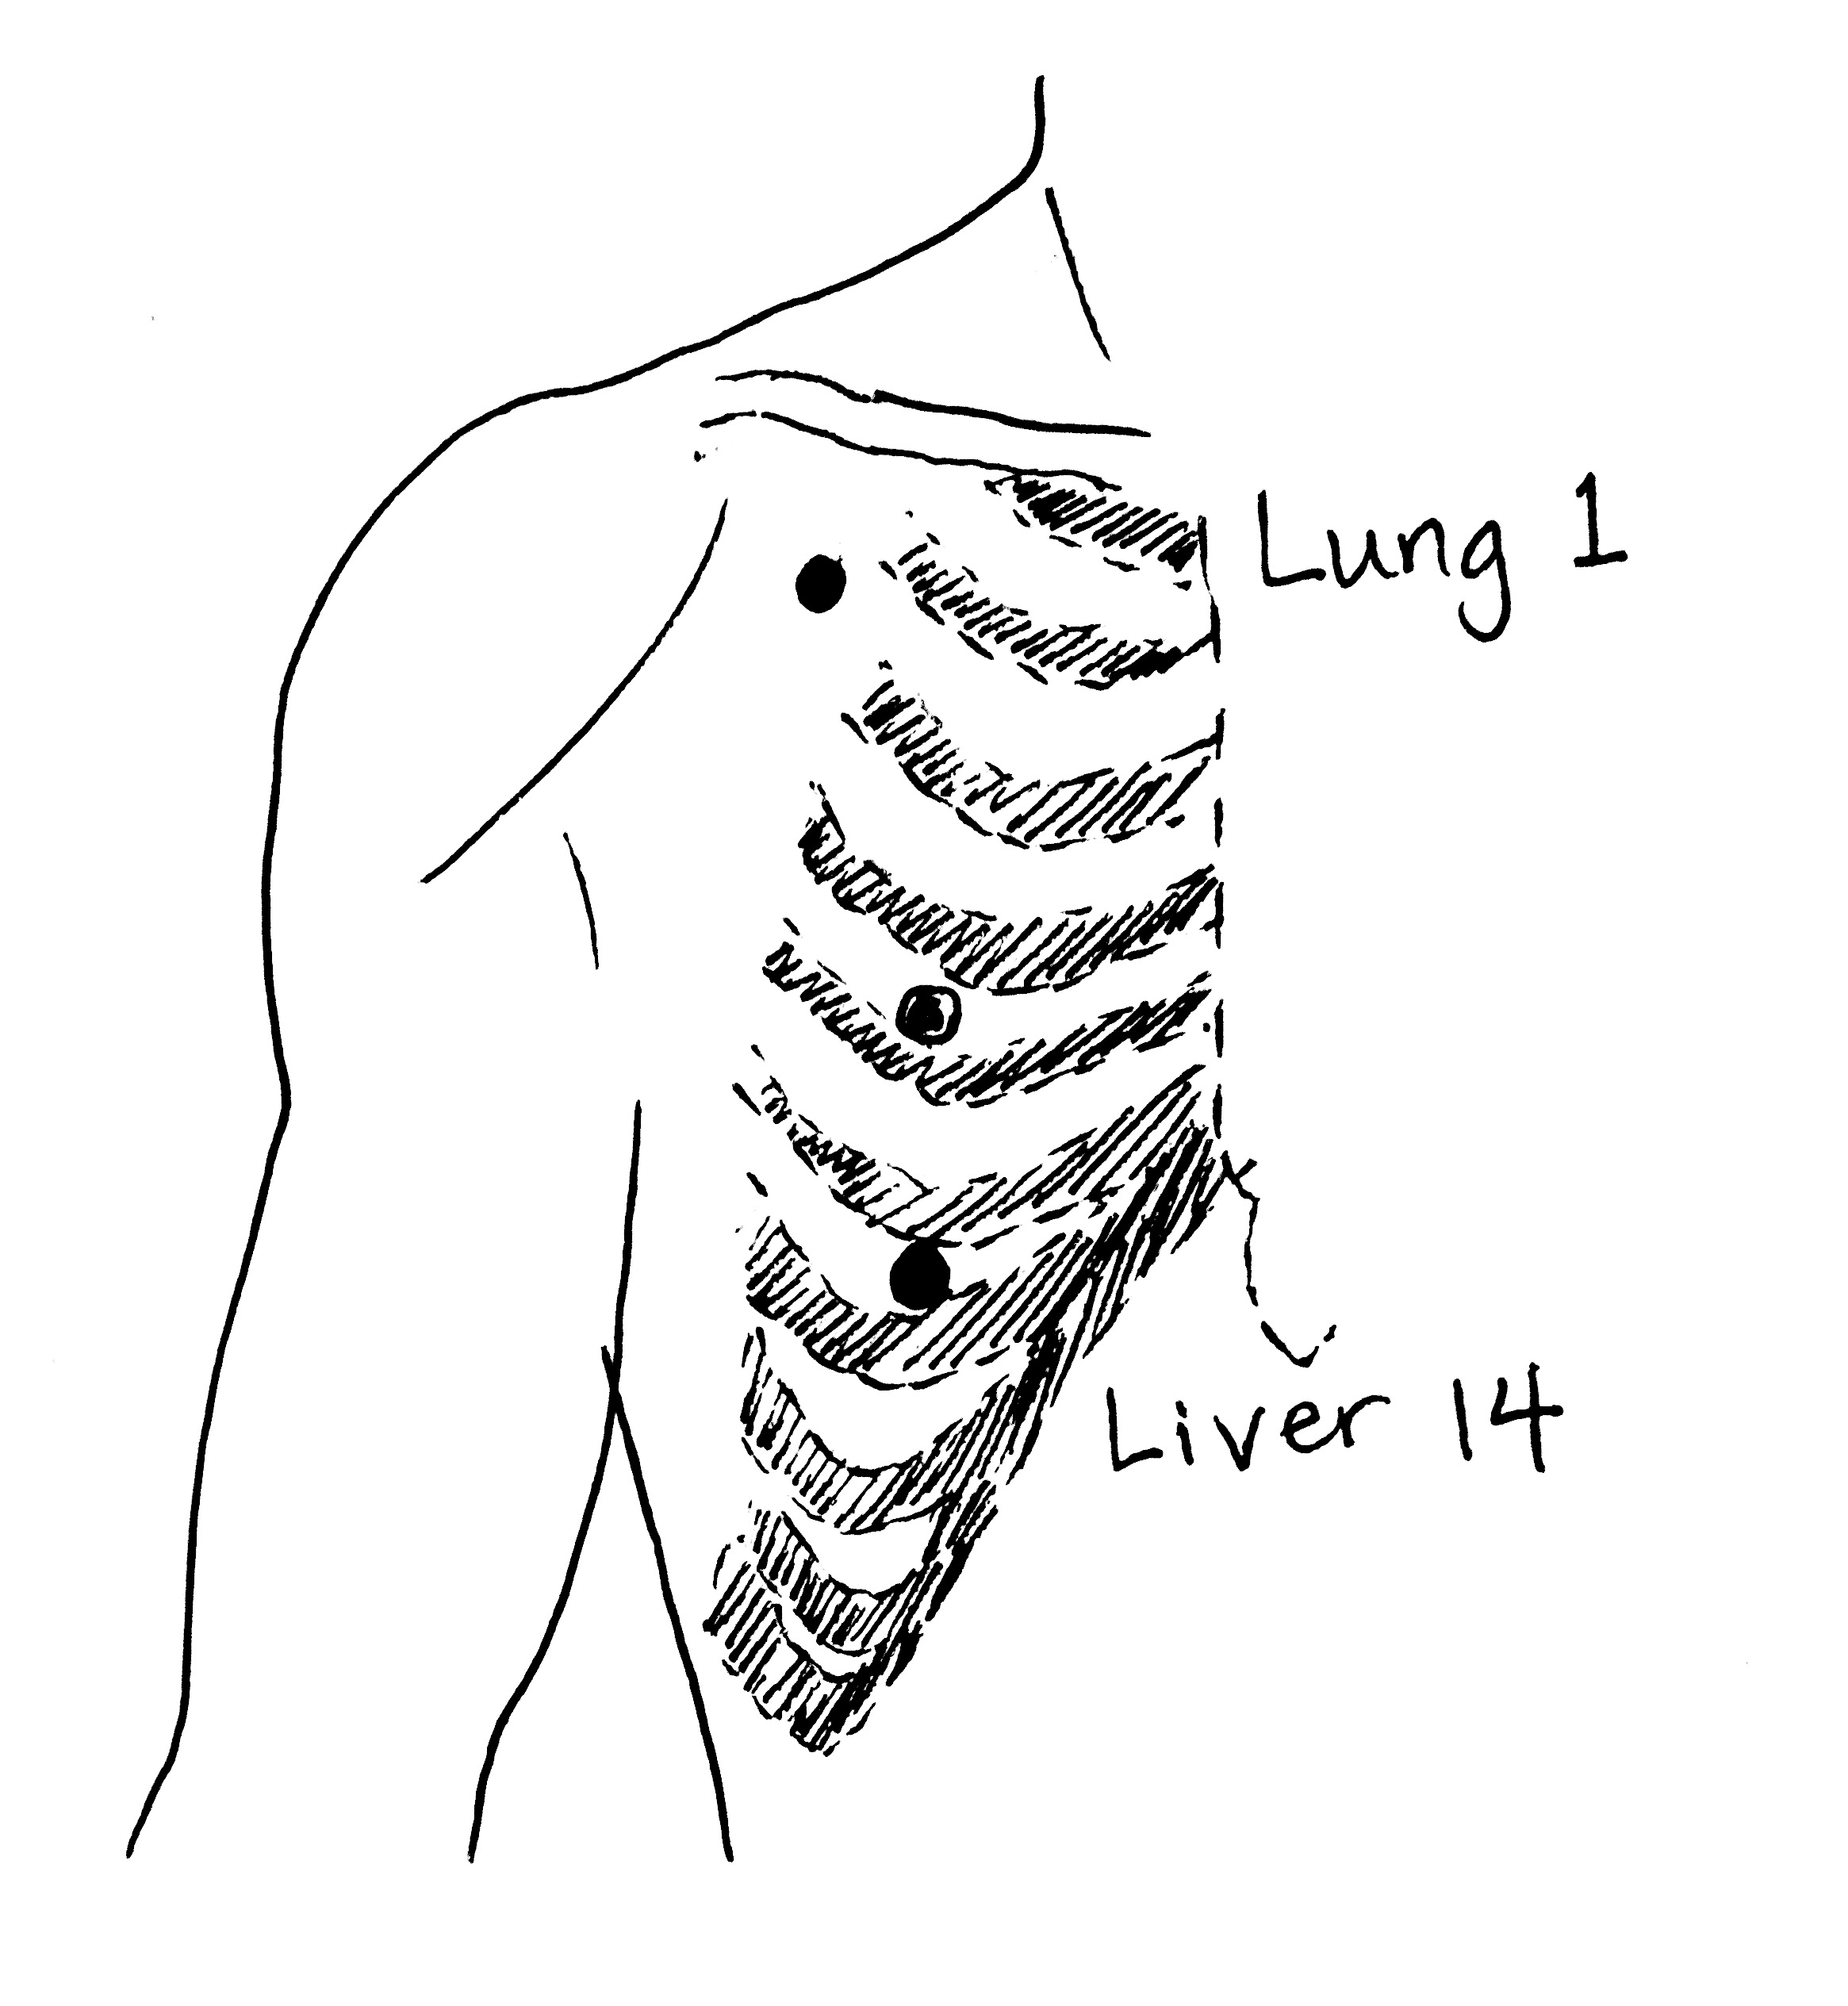 Liver 14 Lung 1 Acupressure for People with Insomnia by Leilani Navar at healgrowthriveflow.com